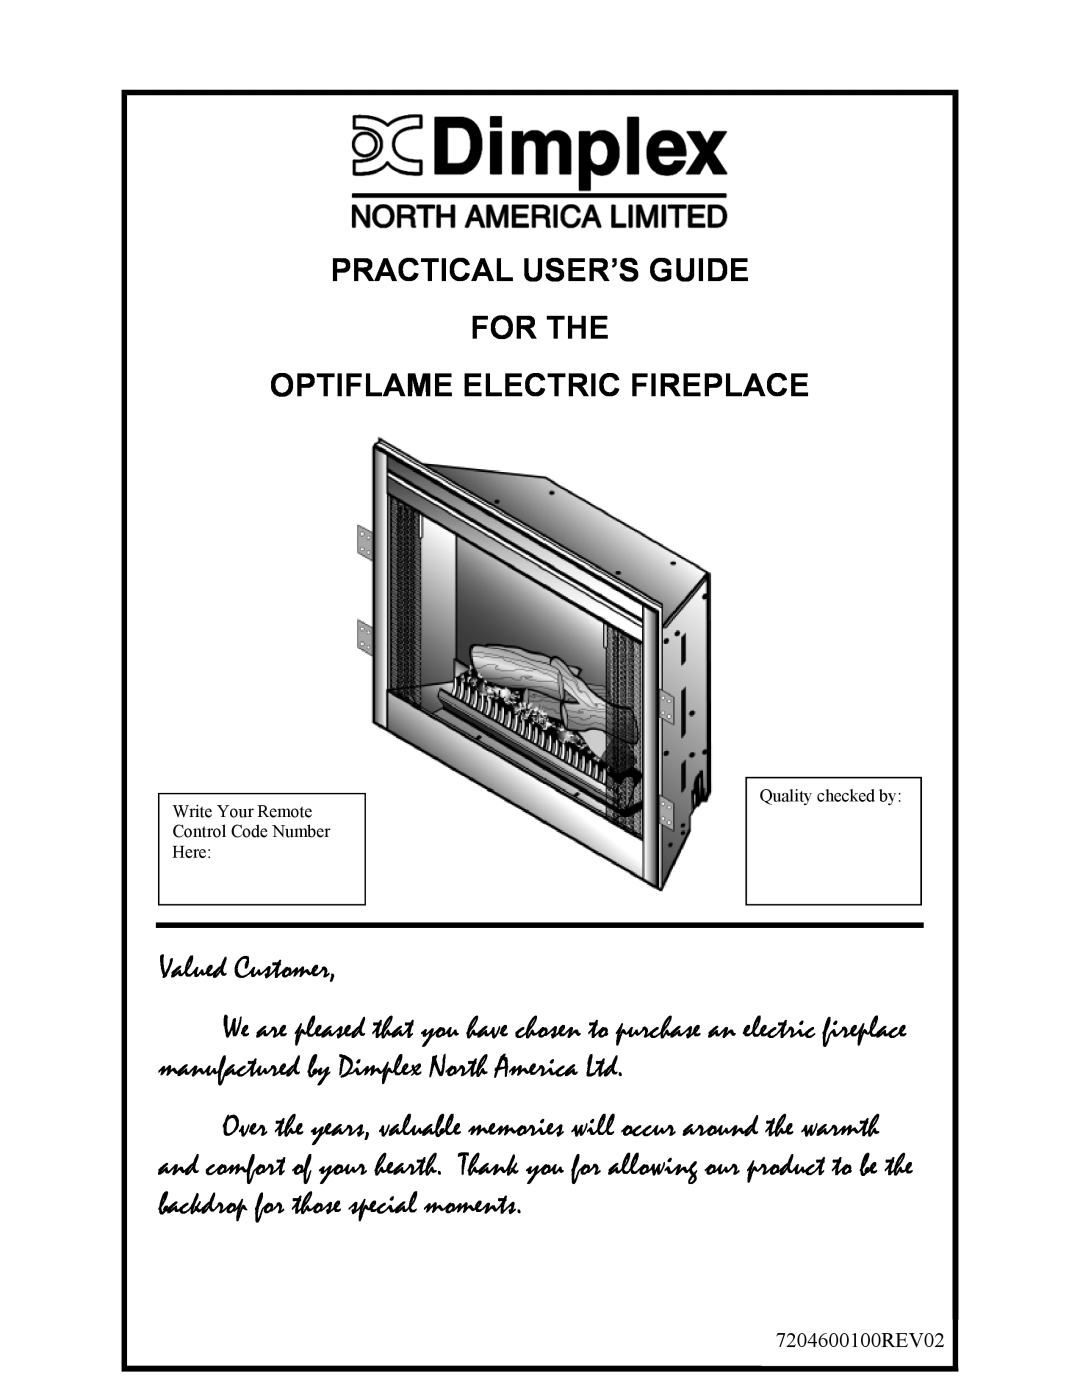 Dimplex manual Practical User’S Guide For The, Optiflame Electric Fireplace 